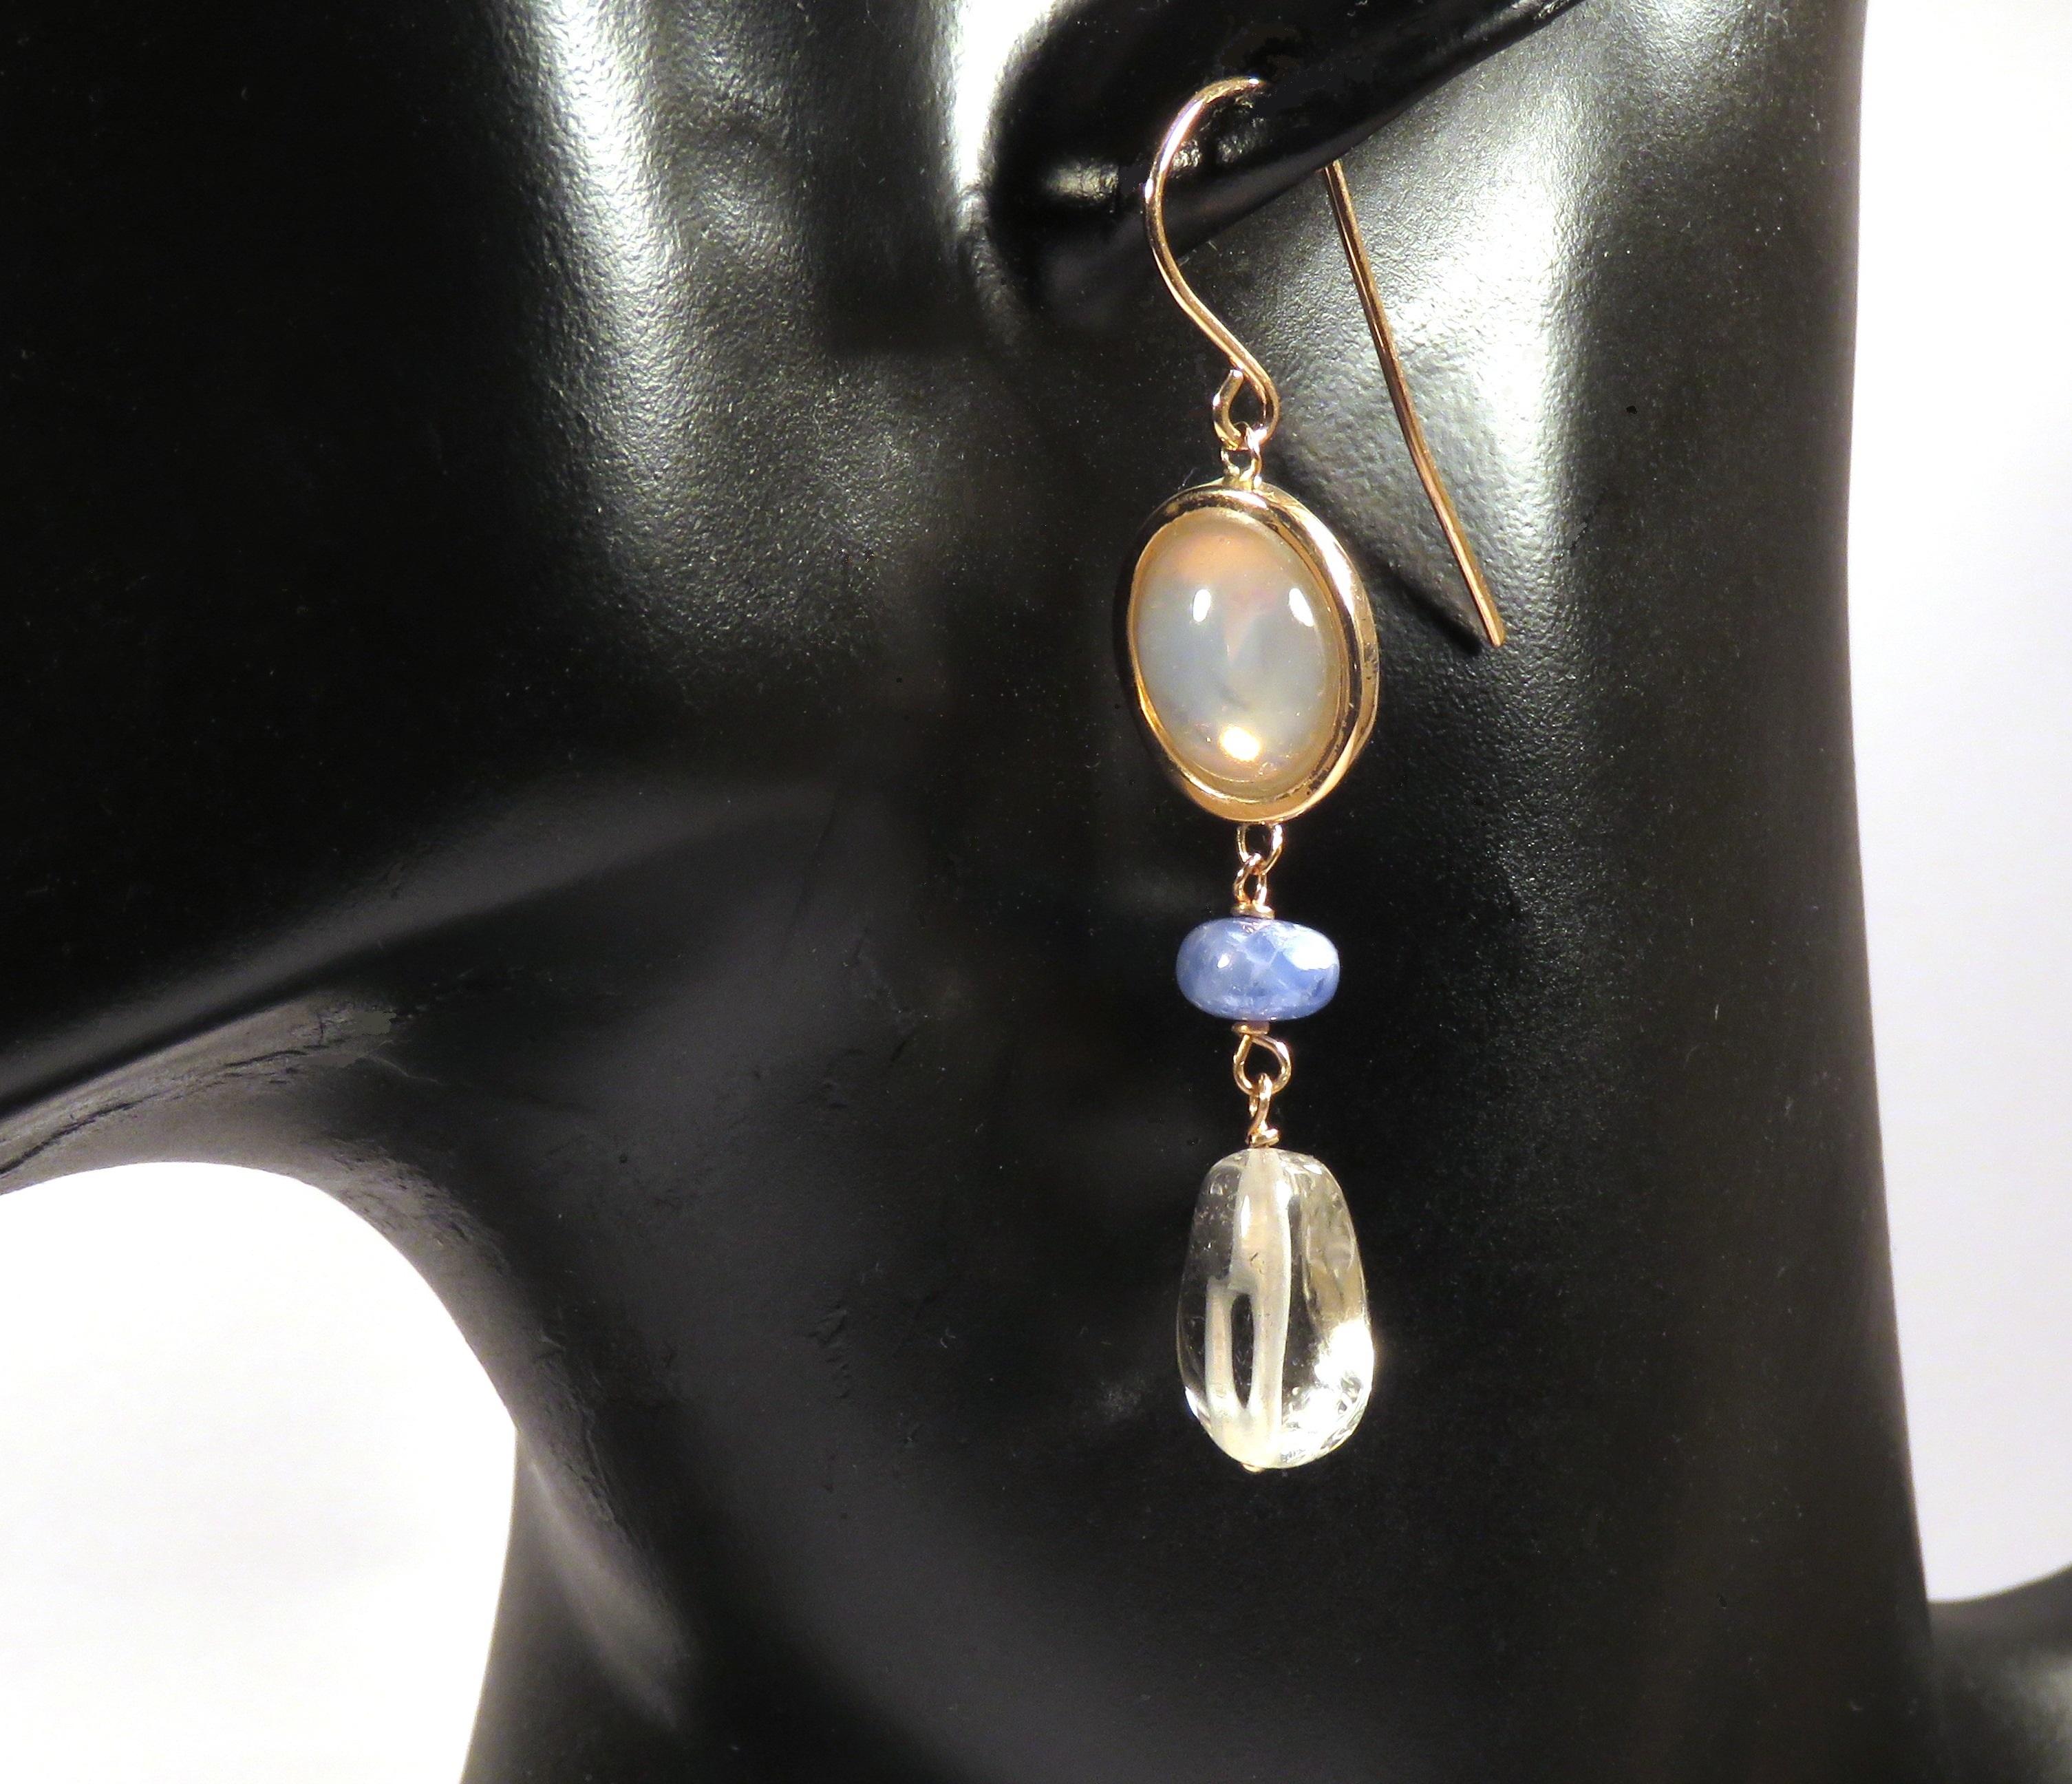 Beautiful dangle earrings in 9 karat rose gold with real oval cabochon cut moonstones, blue sapphires and rock crystal. The length of each earring is 60 mm / 2.362 inches. Each item is stamped with the Italian gold mark 375 and Botta Gioielli